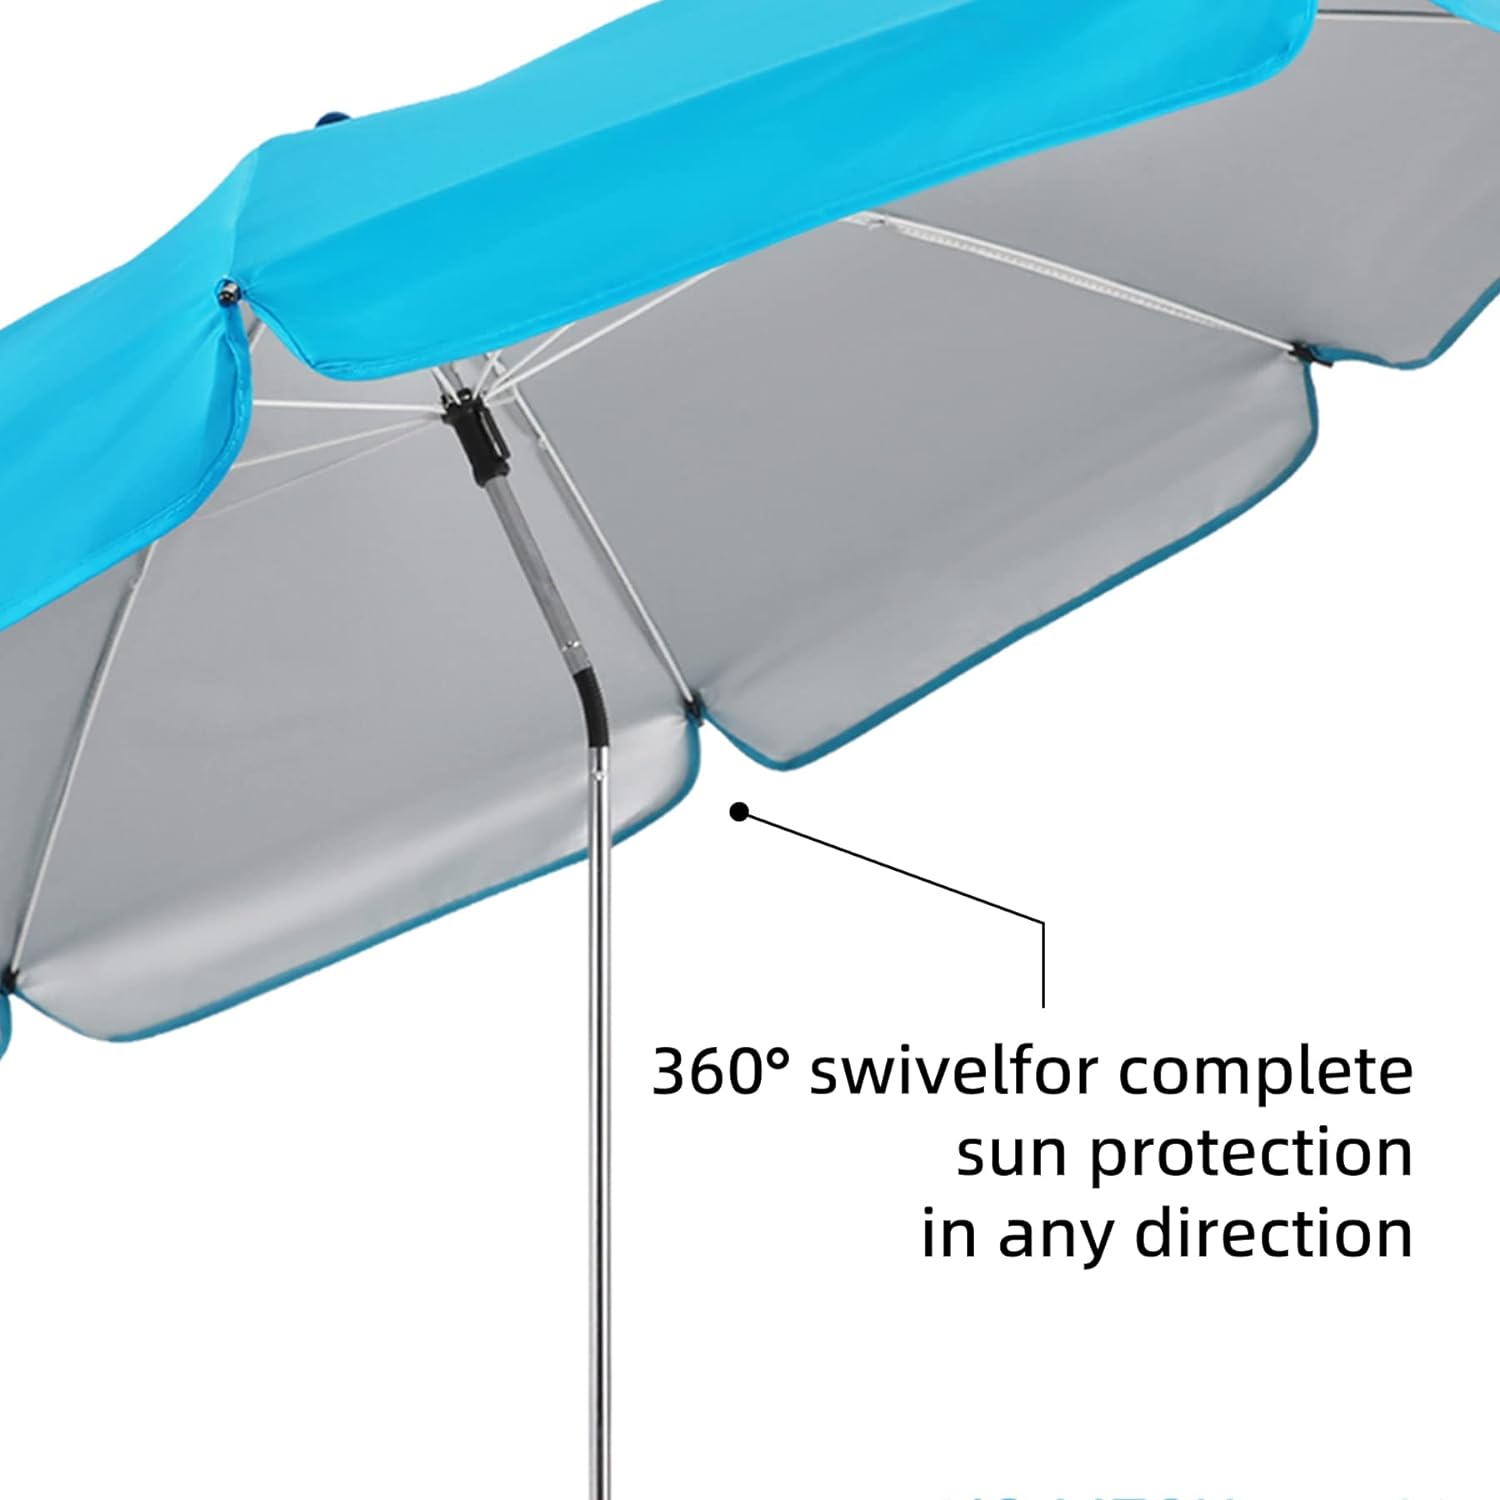 AMMSUN 52 inches XL Chair Umbrella with Universal Clamp Sky Blue